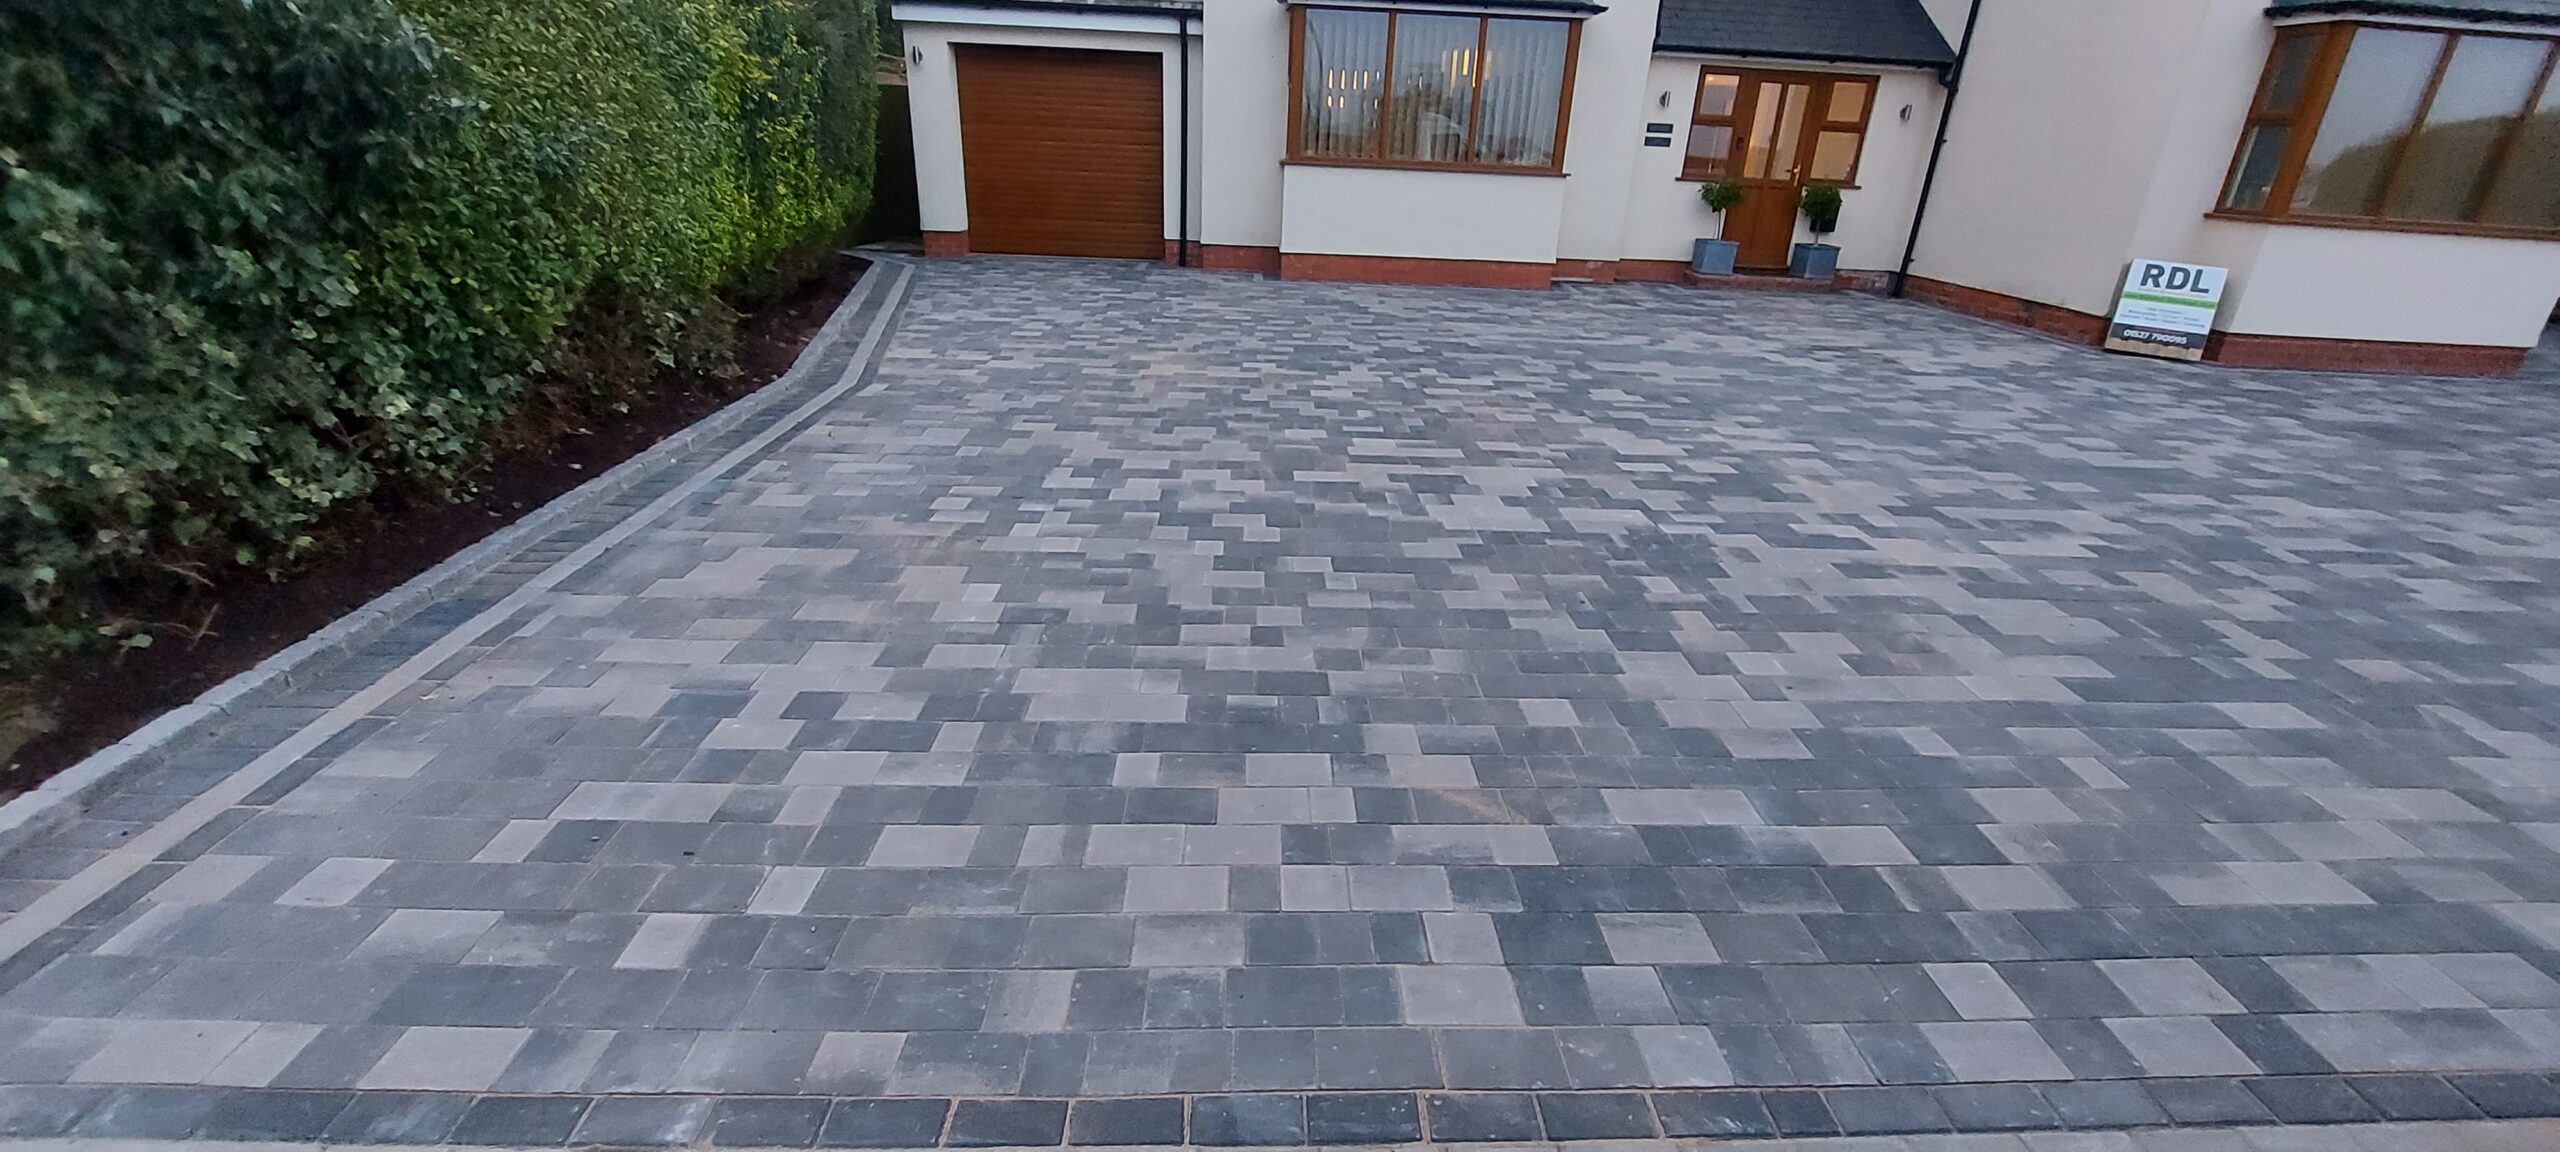 Rumbled Kerb with Block paving